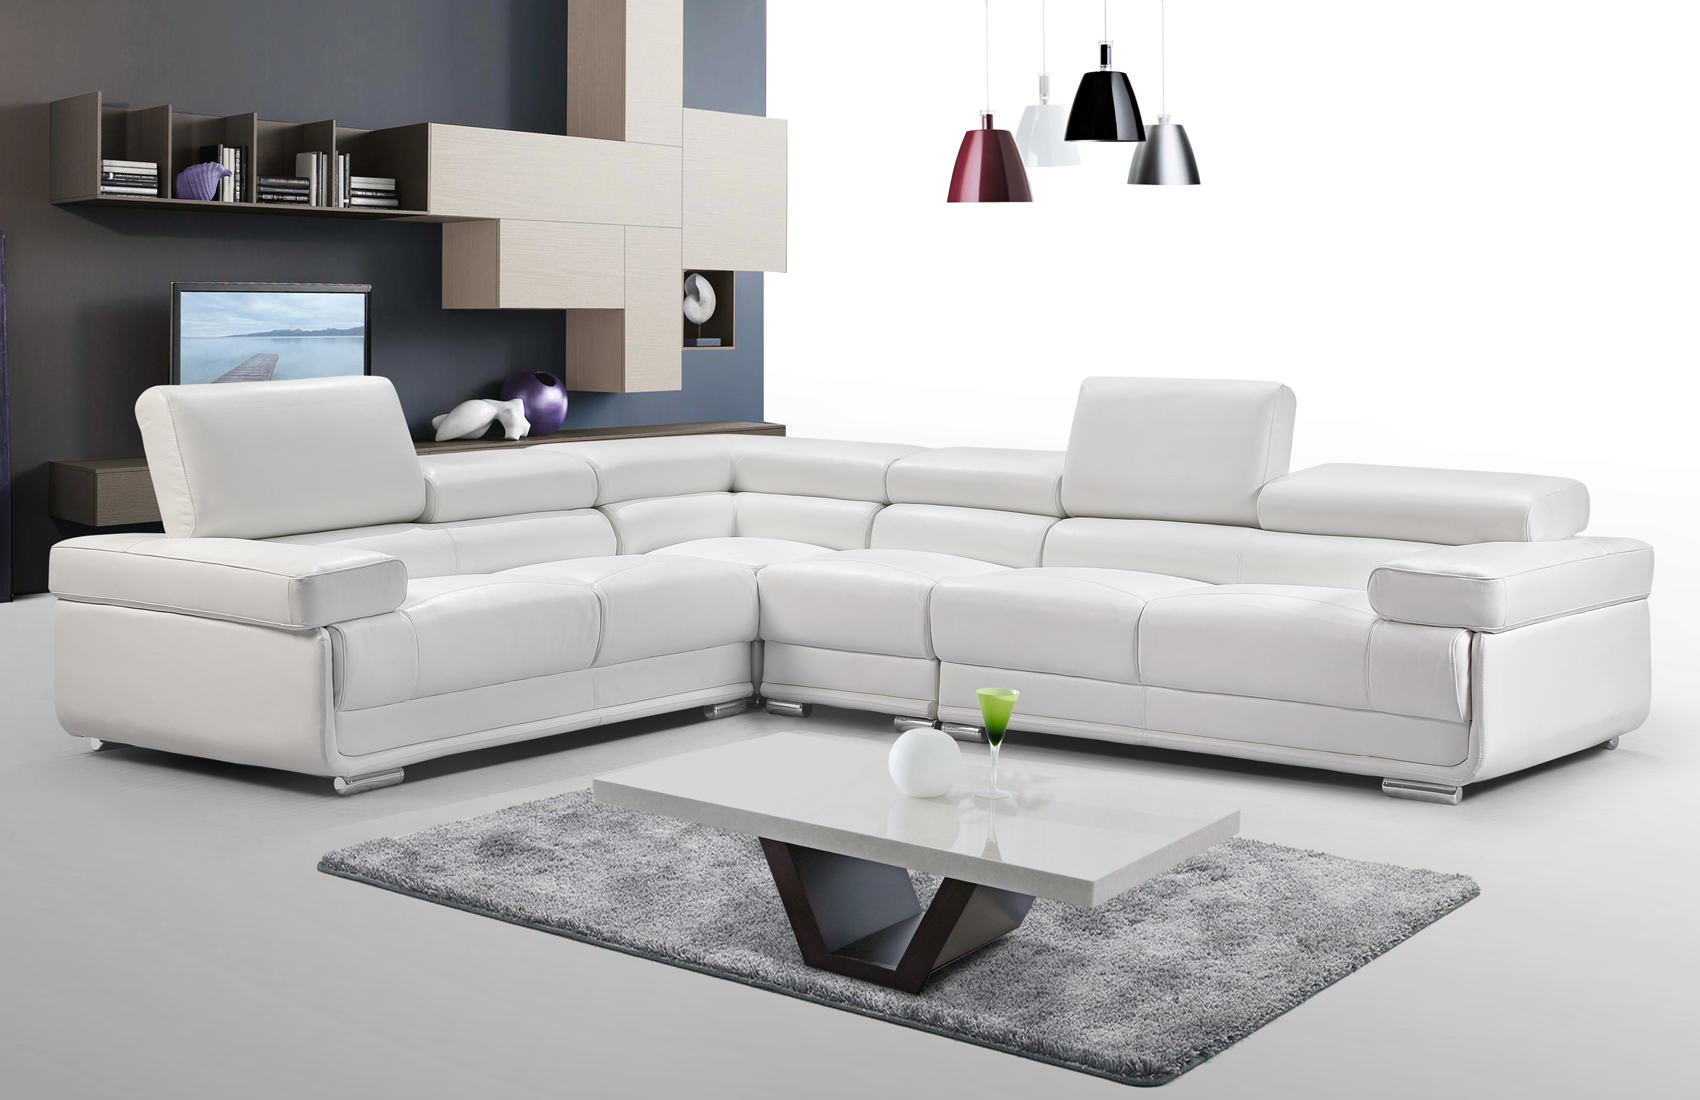 Living Room Furniture Sleepers Sofas Loveseats and Chairs 2119 Sectional White